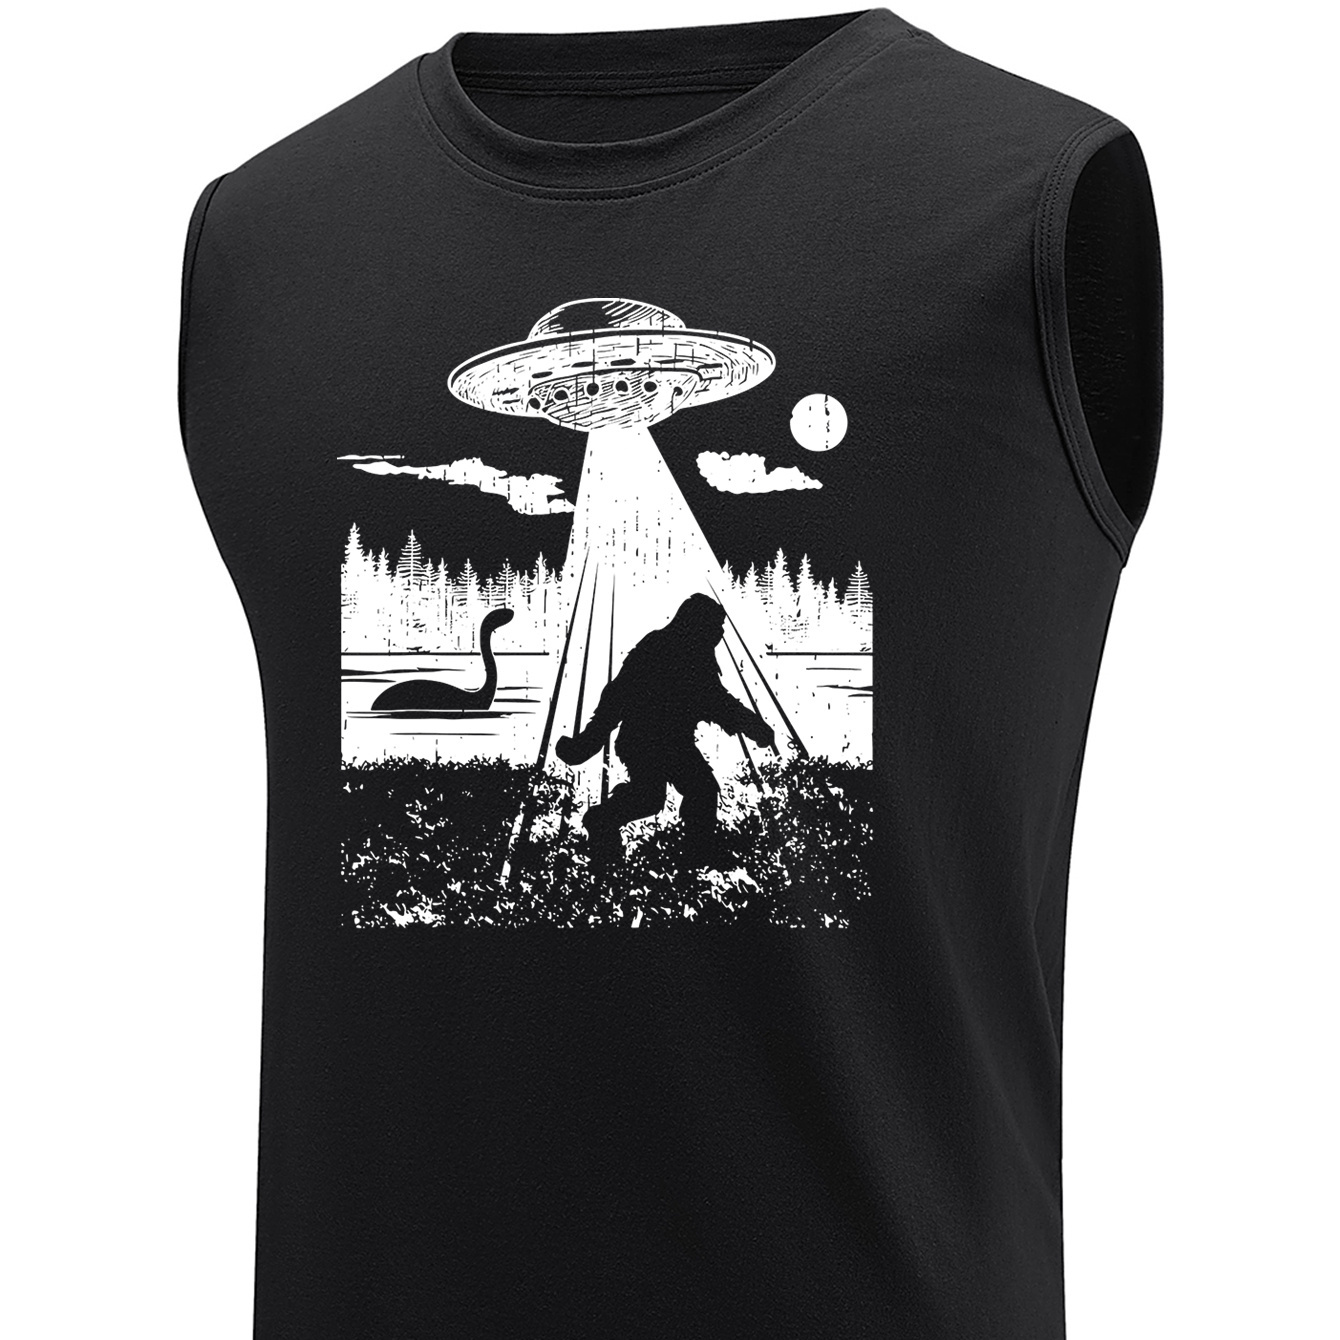 

Plus Size Men's Ufo Print Tank Top, Loose Fit Breathable Sleeveless Tees For Sports/fitness